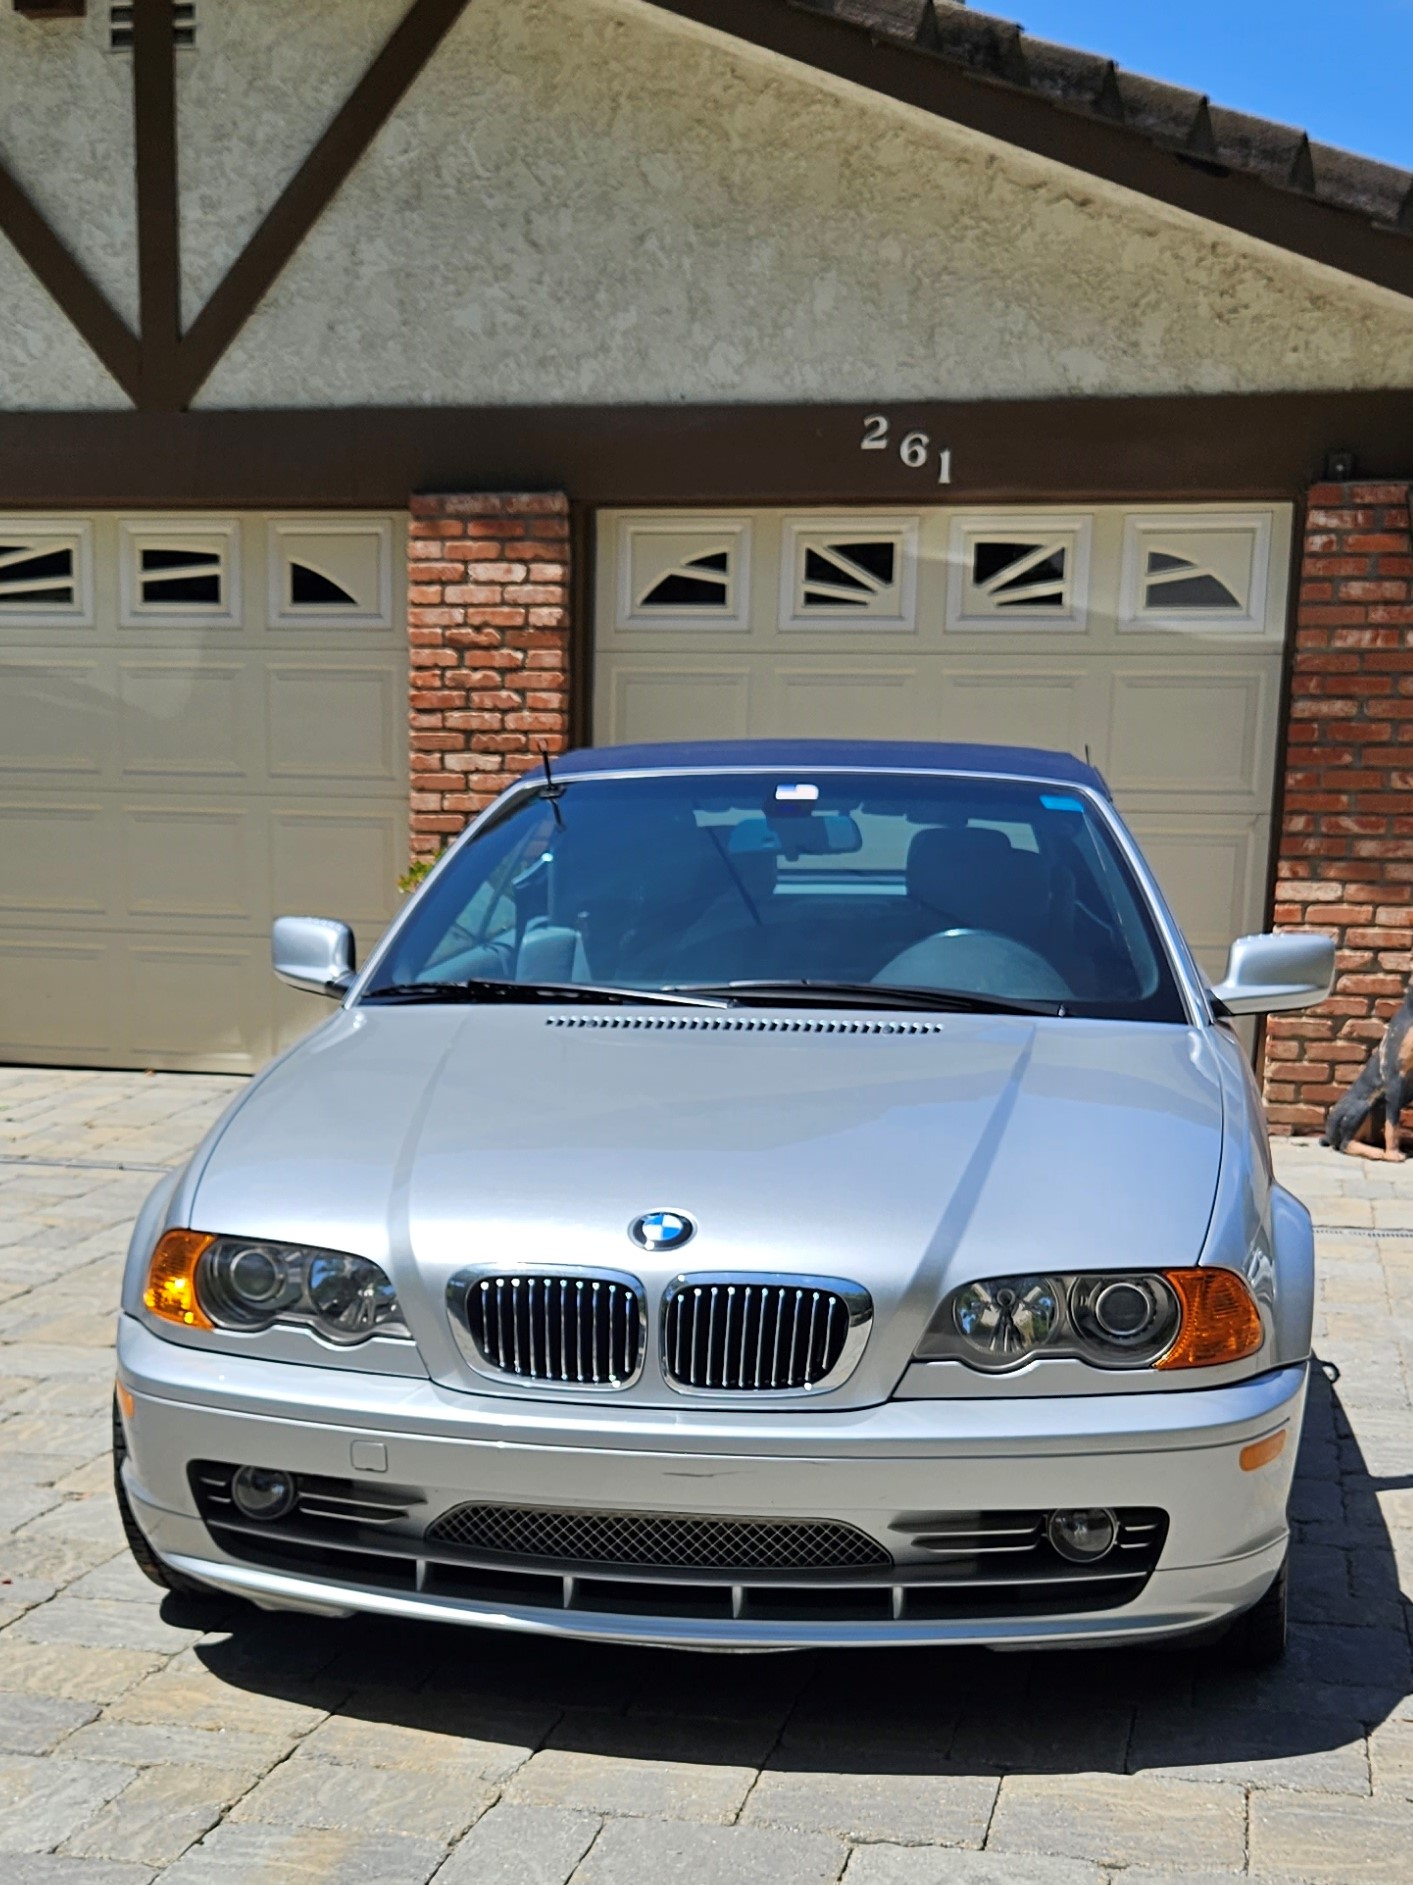 Used BMW 330Ci for Sale Right Now - Autotrader